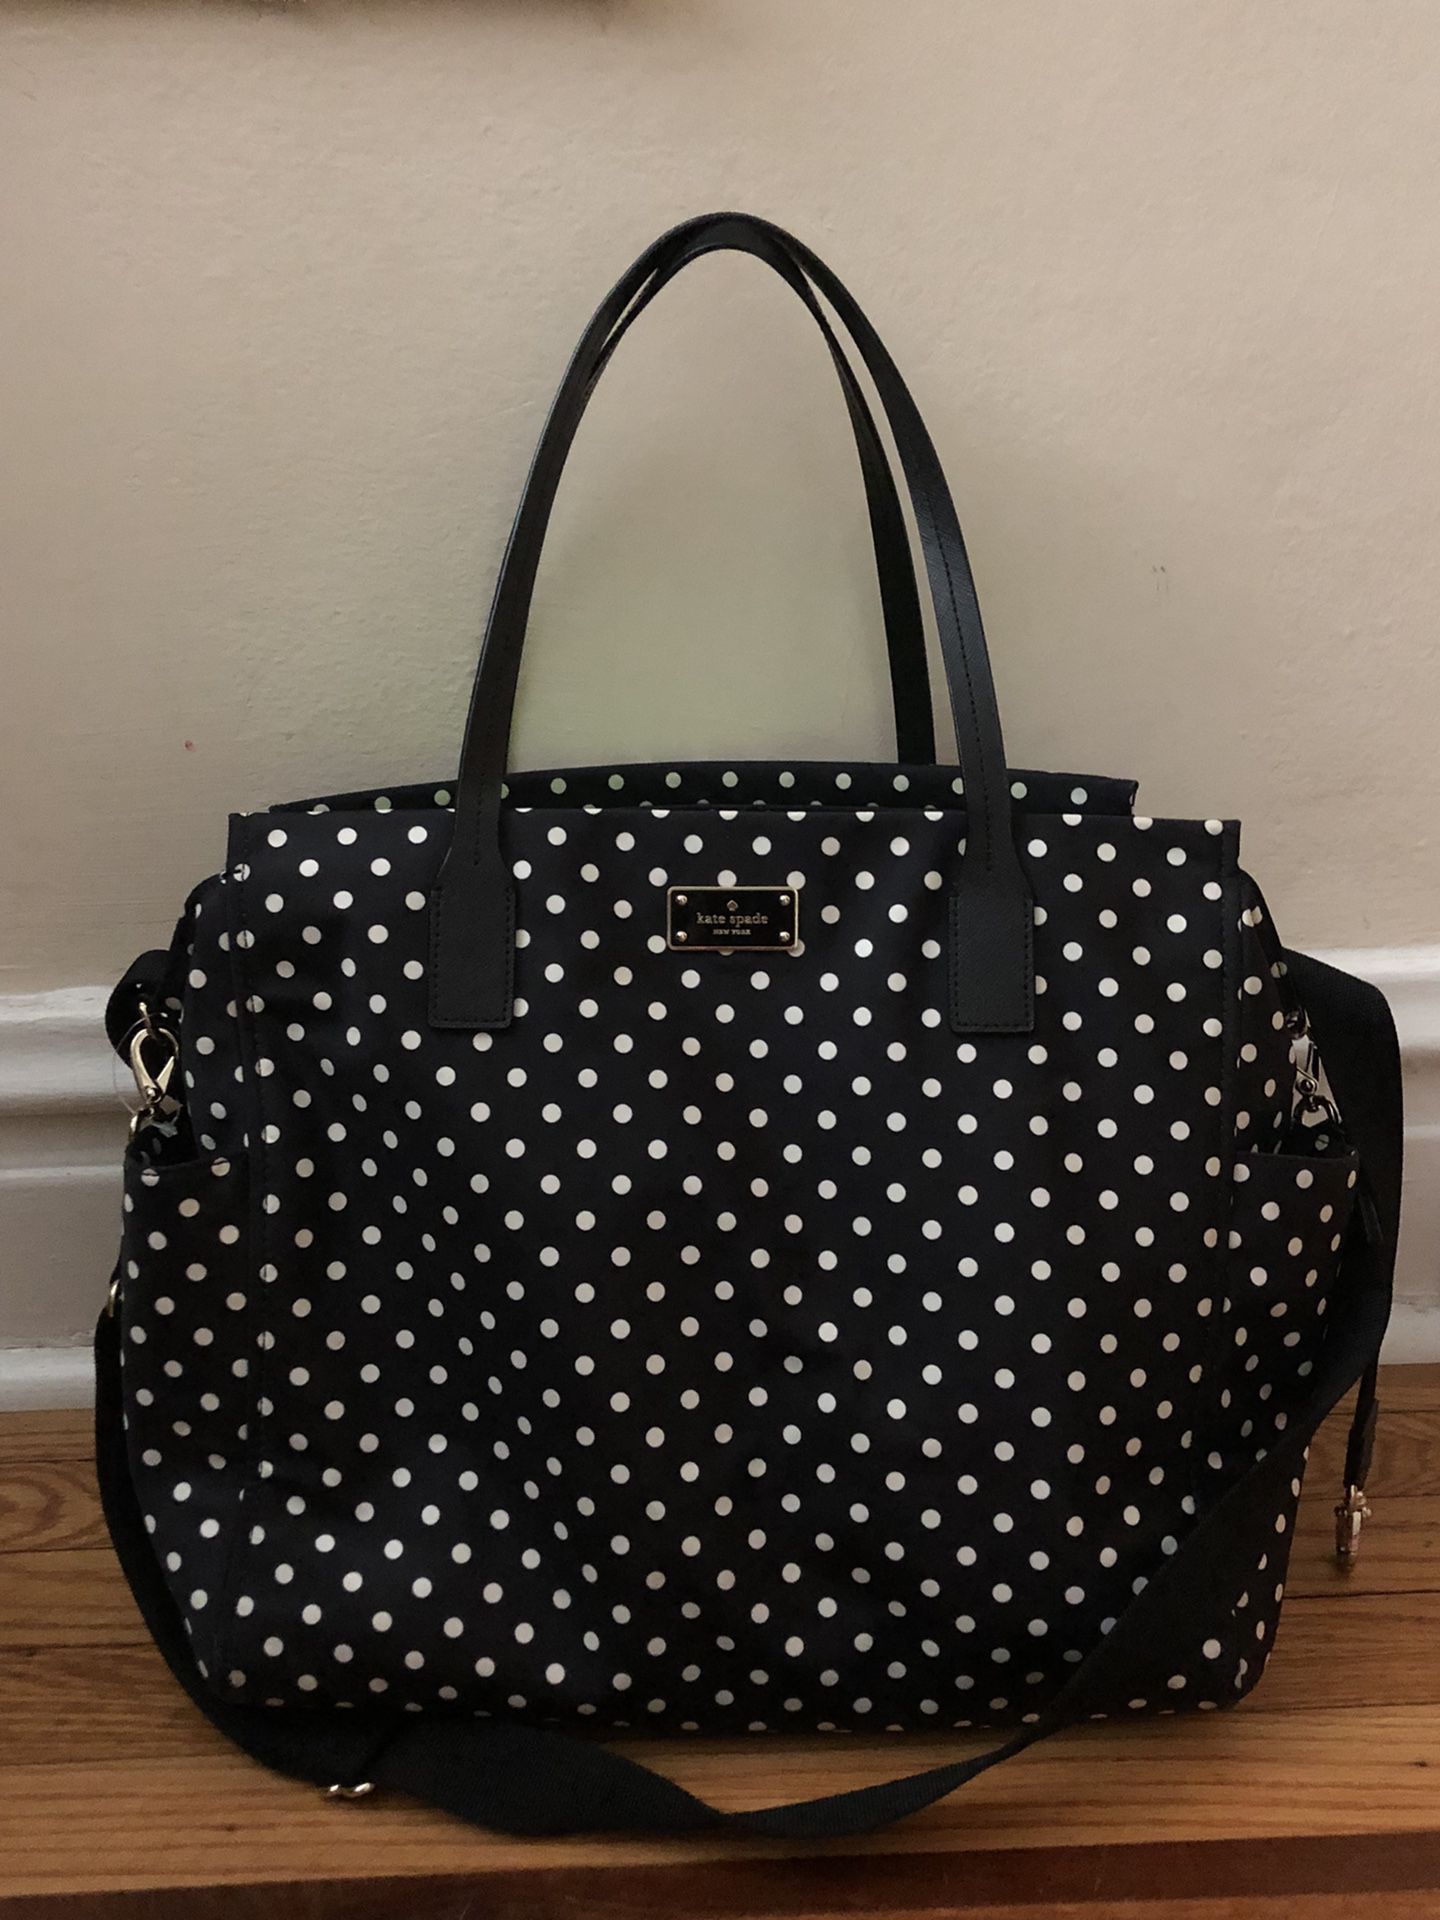 Kate Spade Diaper Bag for Sale in New Rochelle, NY - OfferUp